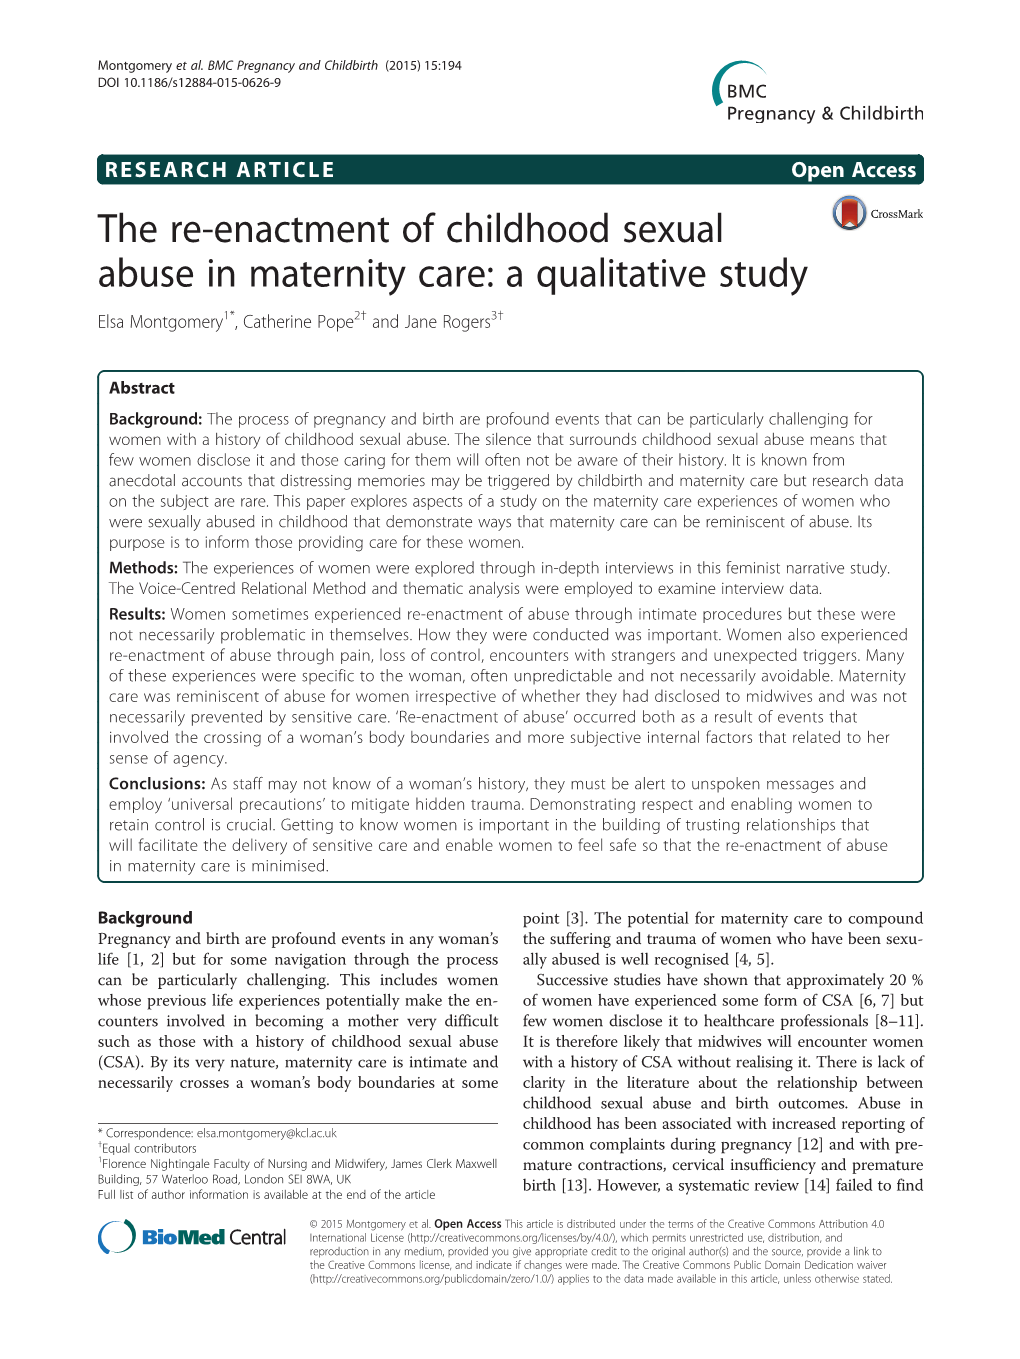 The Re-Enactment of Childhood Sexual Abuse in Maternity Care: a Qualitative Study Elsa Montgomery1*, Catherine Pope2† and Jane Rogers3†